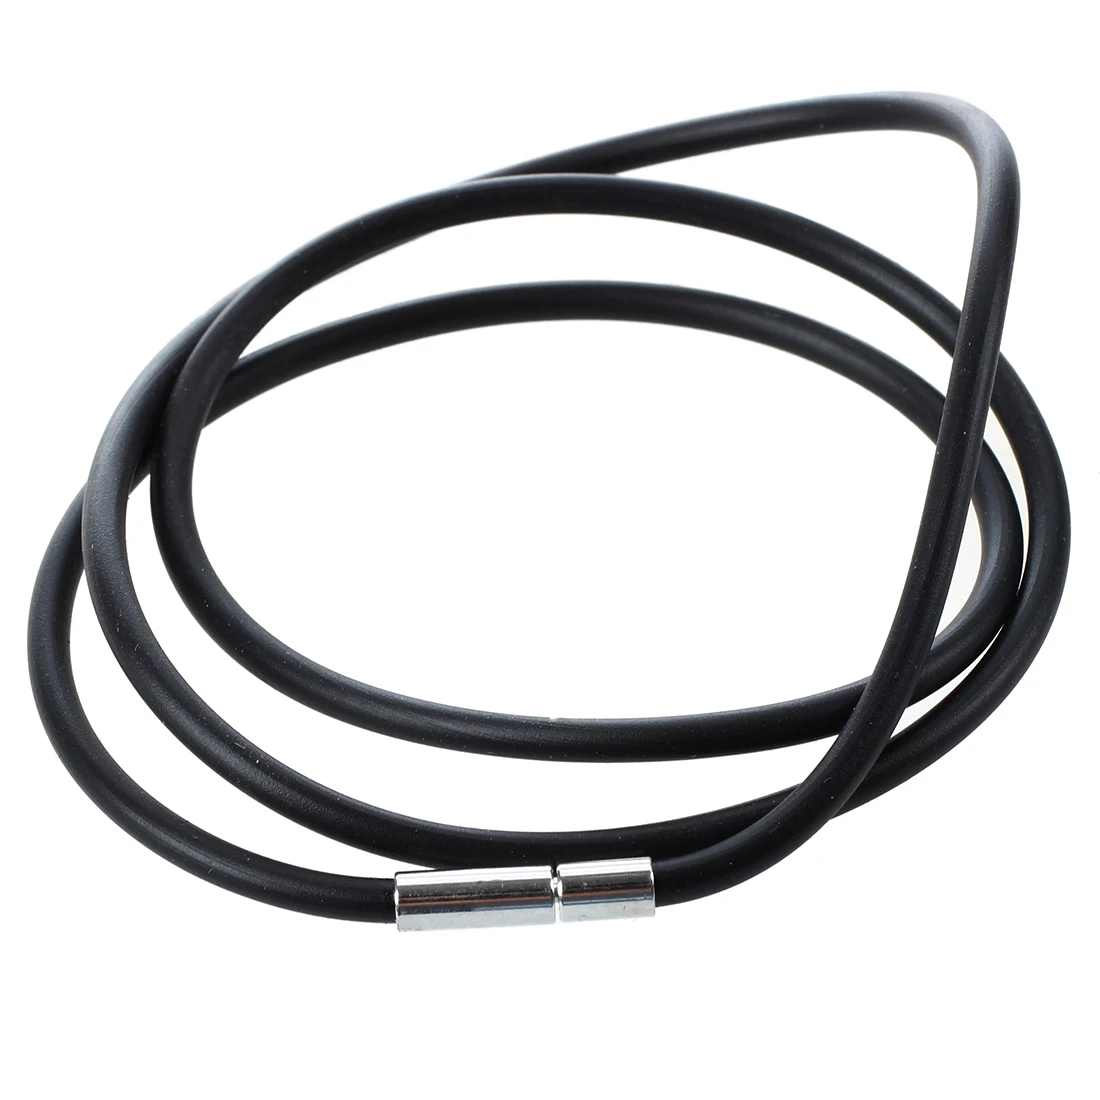 

3mm Black Rubber Cord Necklace with Stainless Steel Closure Women Men Choker Accessories Collier - 25.5inch